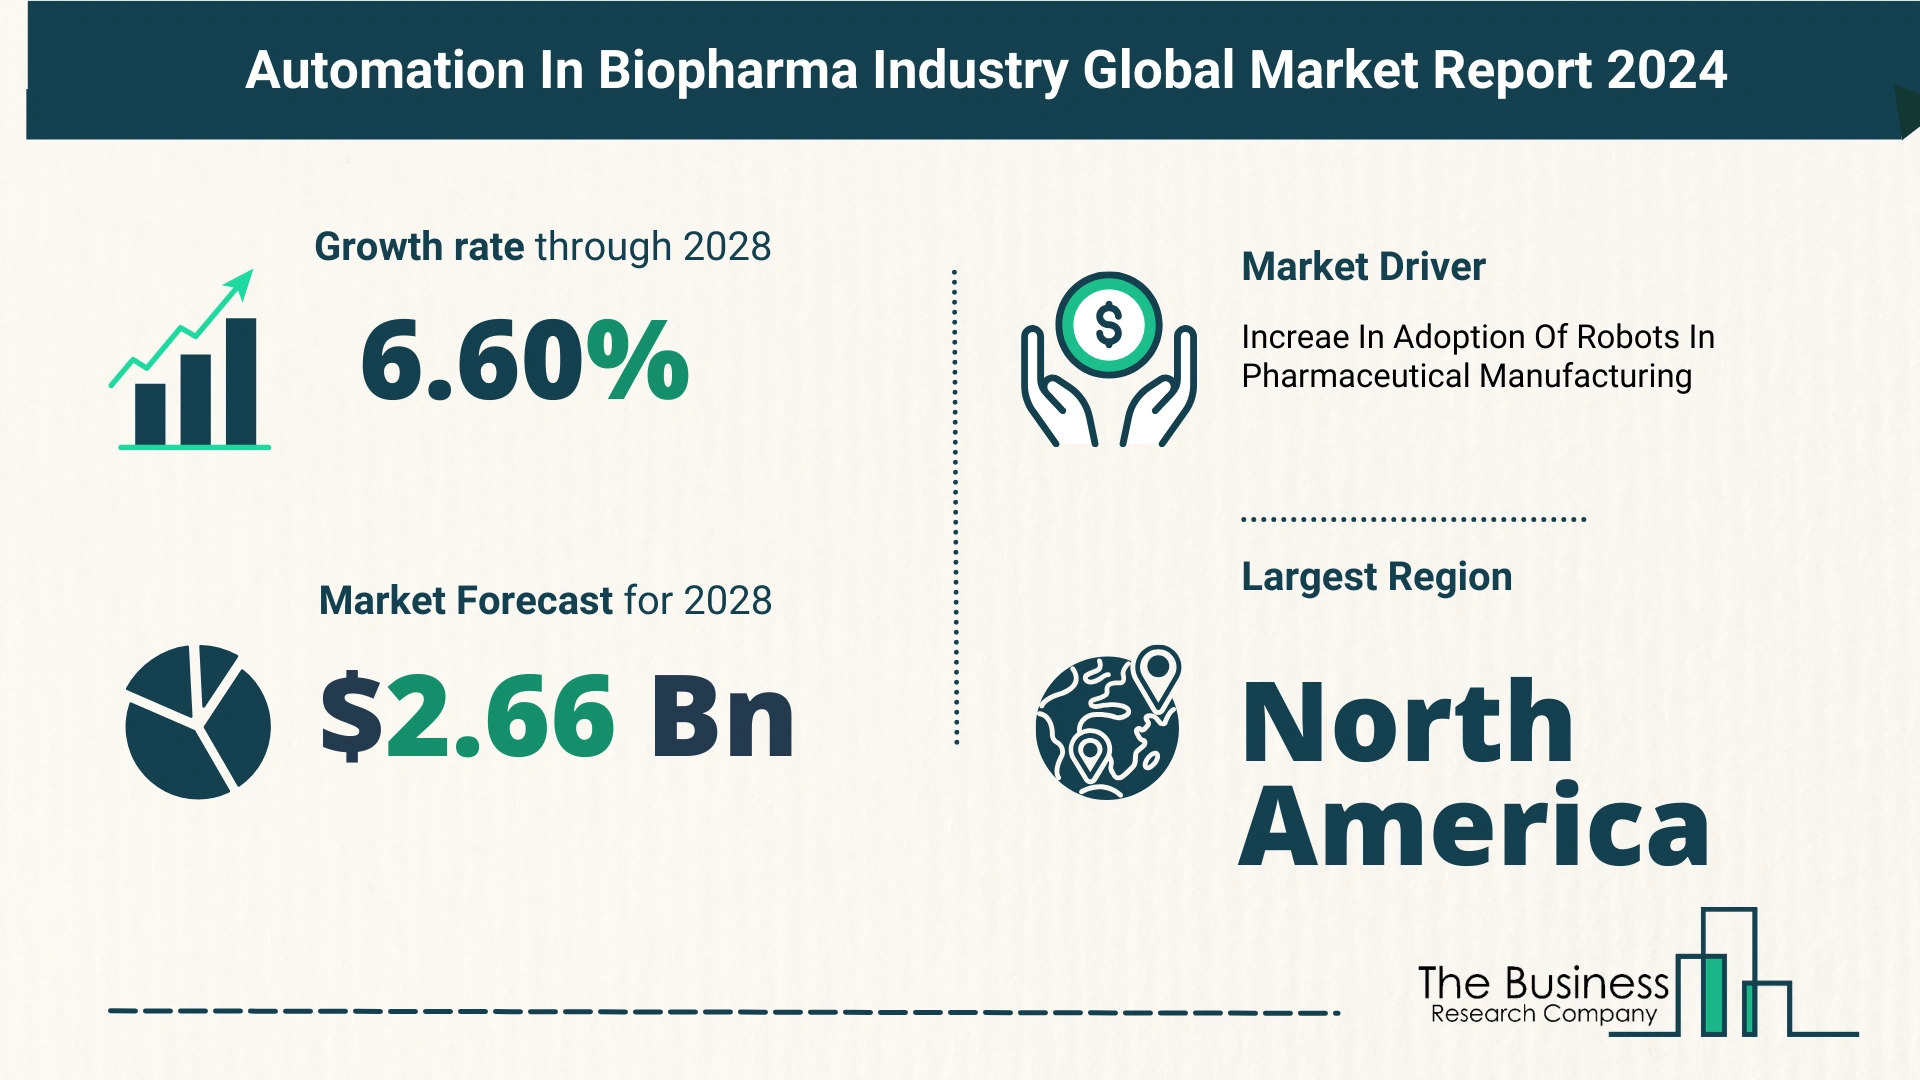 Global Automation In Biopharma Industry Market